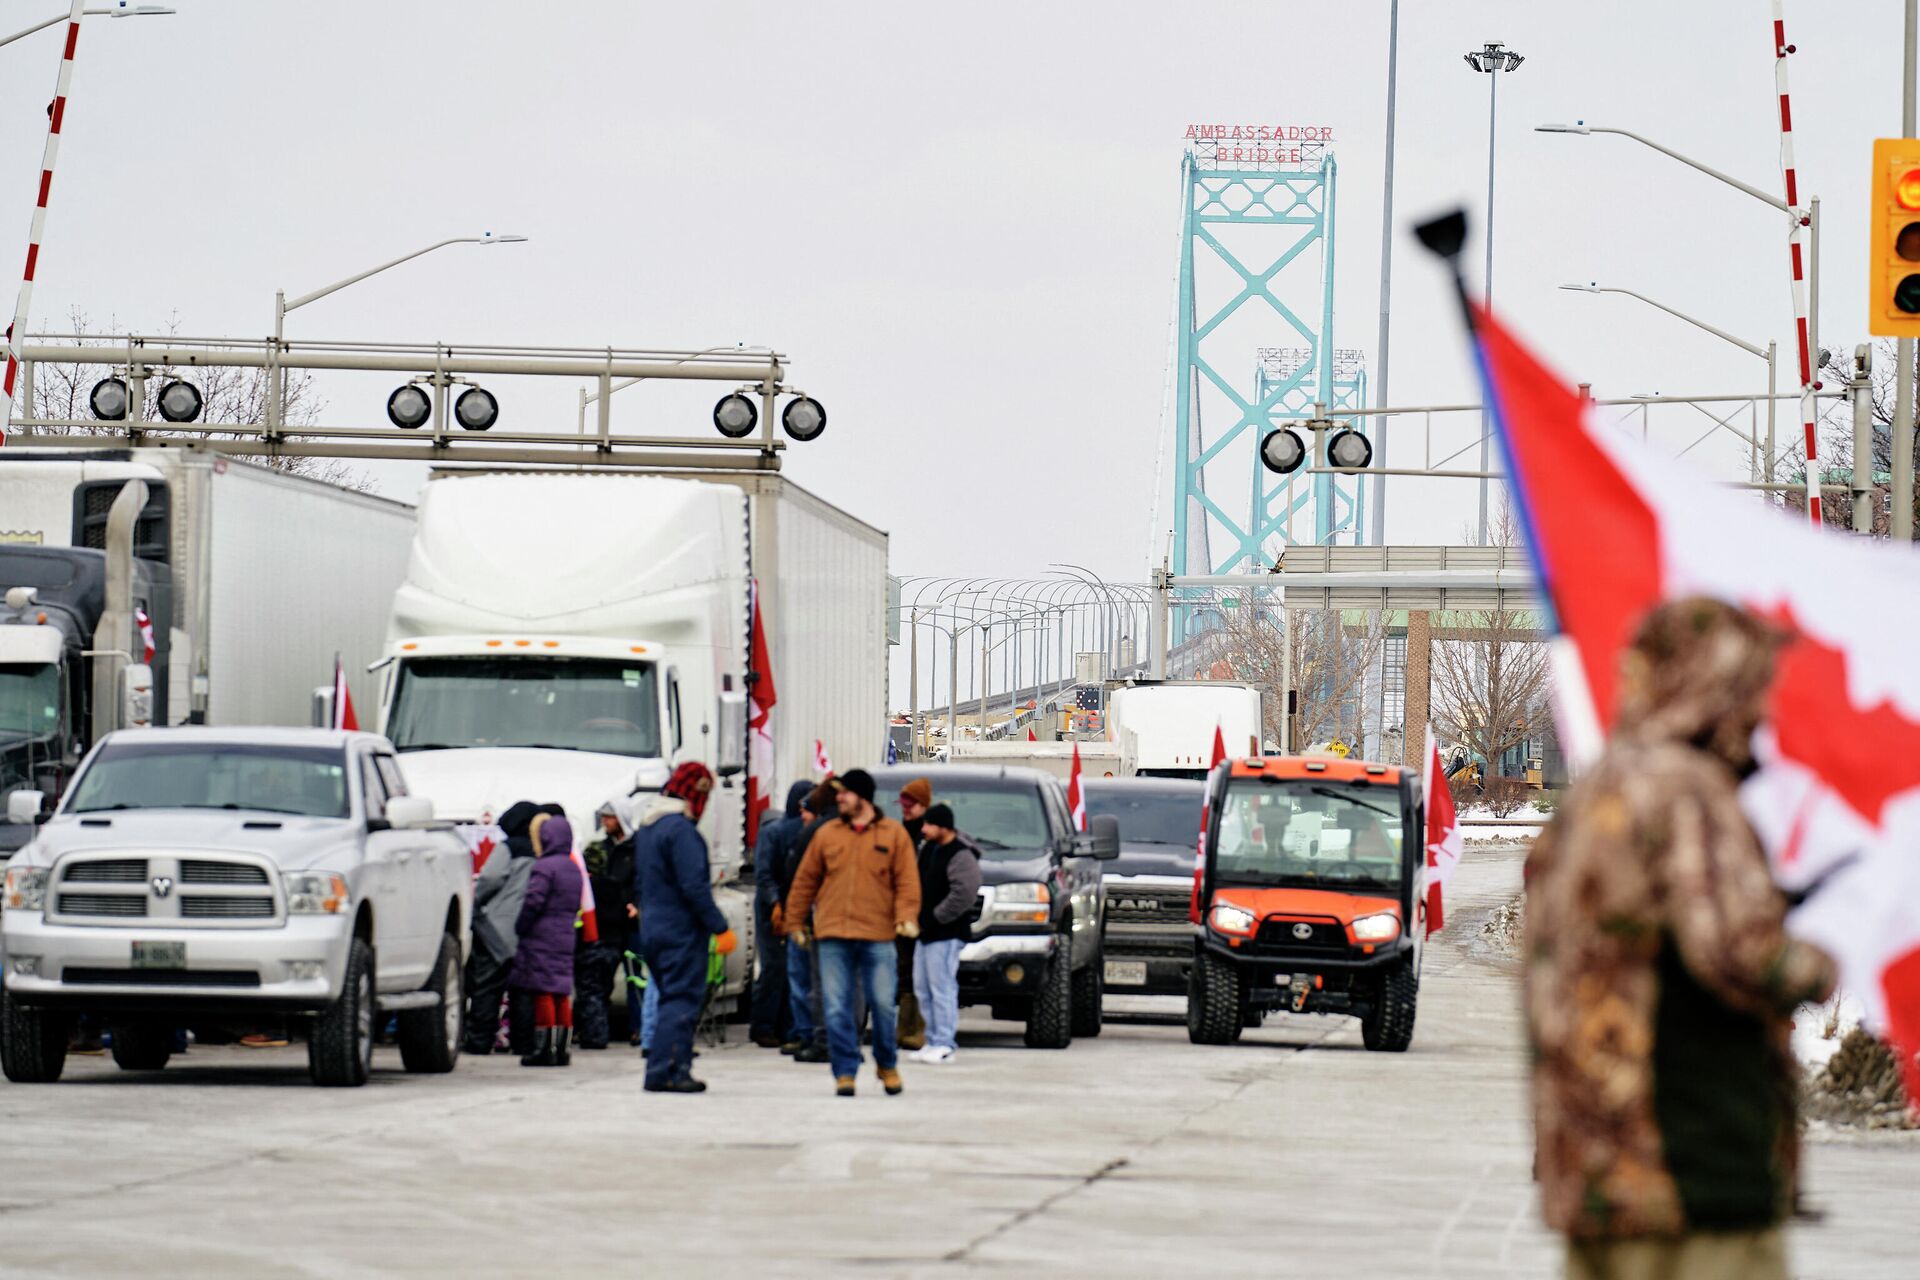 Supporters of the Truckers Convoy against the Covid-19 vaccine mandate block traffic in Canada bound lanes of the Ambassador Bridge border crossing, in Windsor, Ontario, on February 8, 2022. - Sputnik International, 1920, 26.09.2022